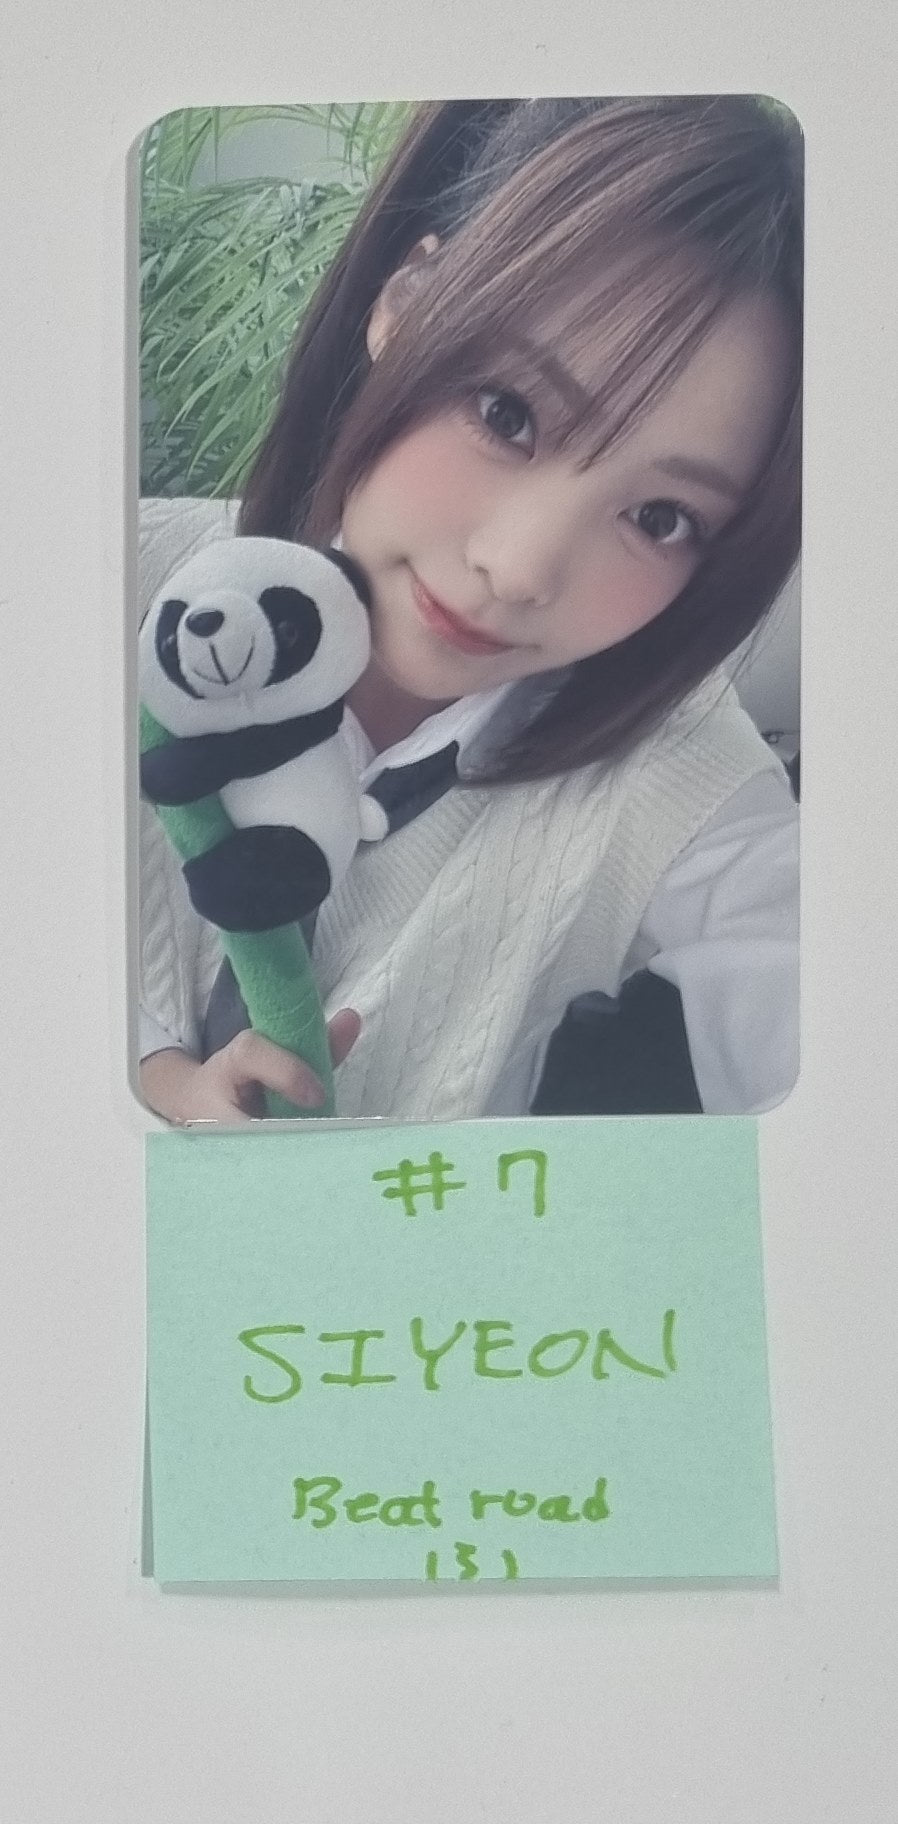 QWER "MANITO" - Beat Road Fansign Event Photocard Round 2 [24.6.11]